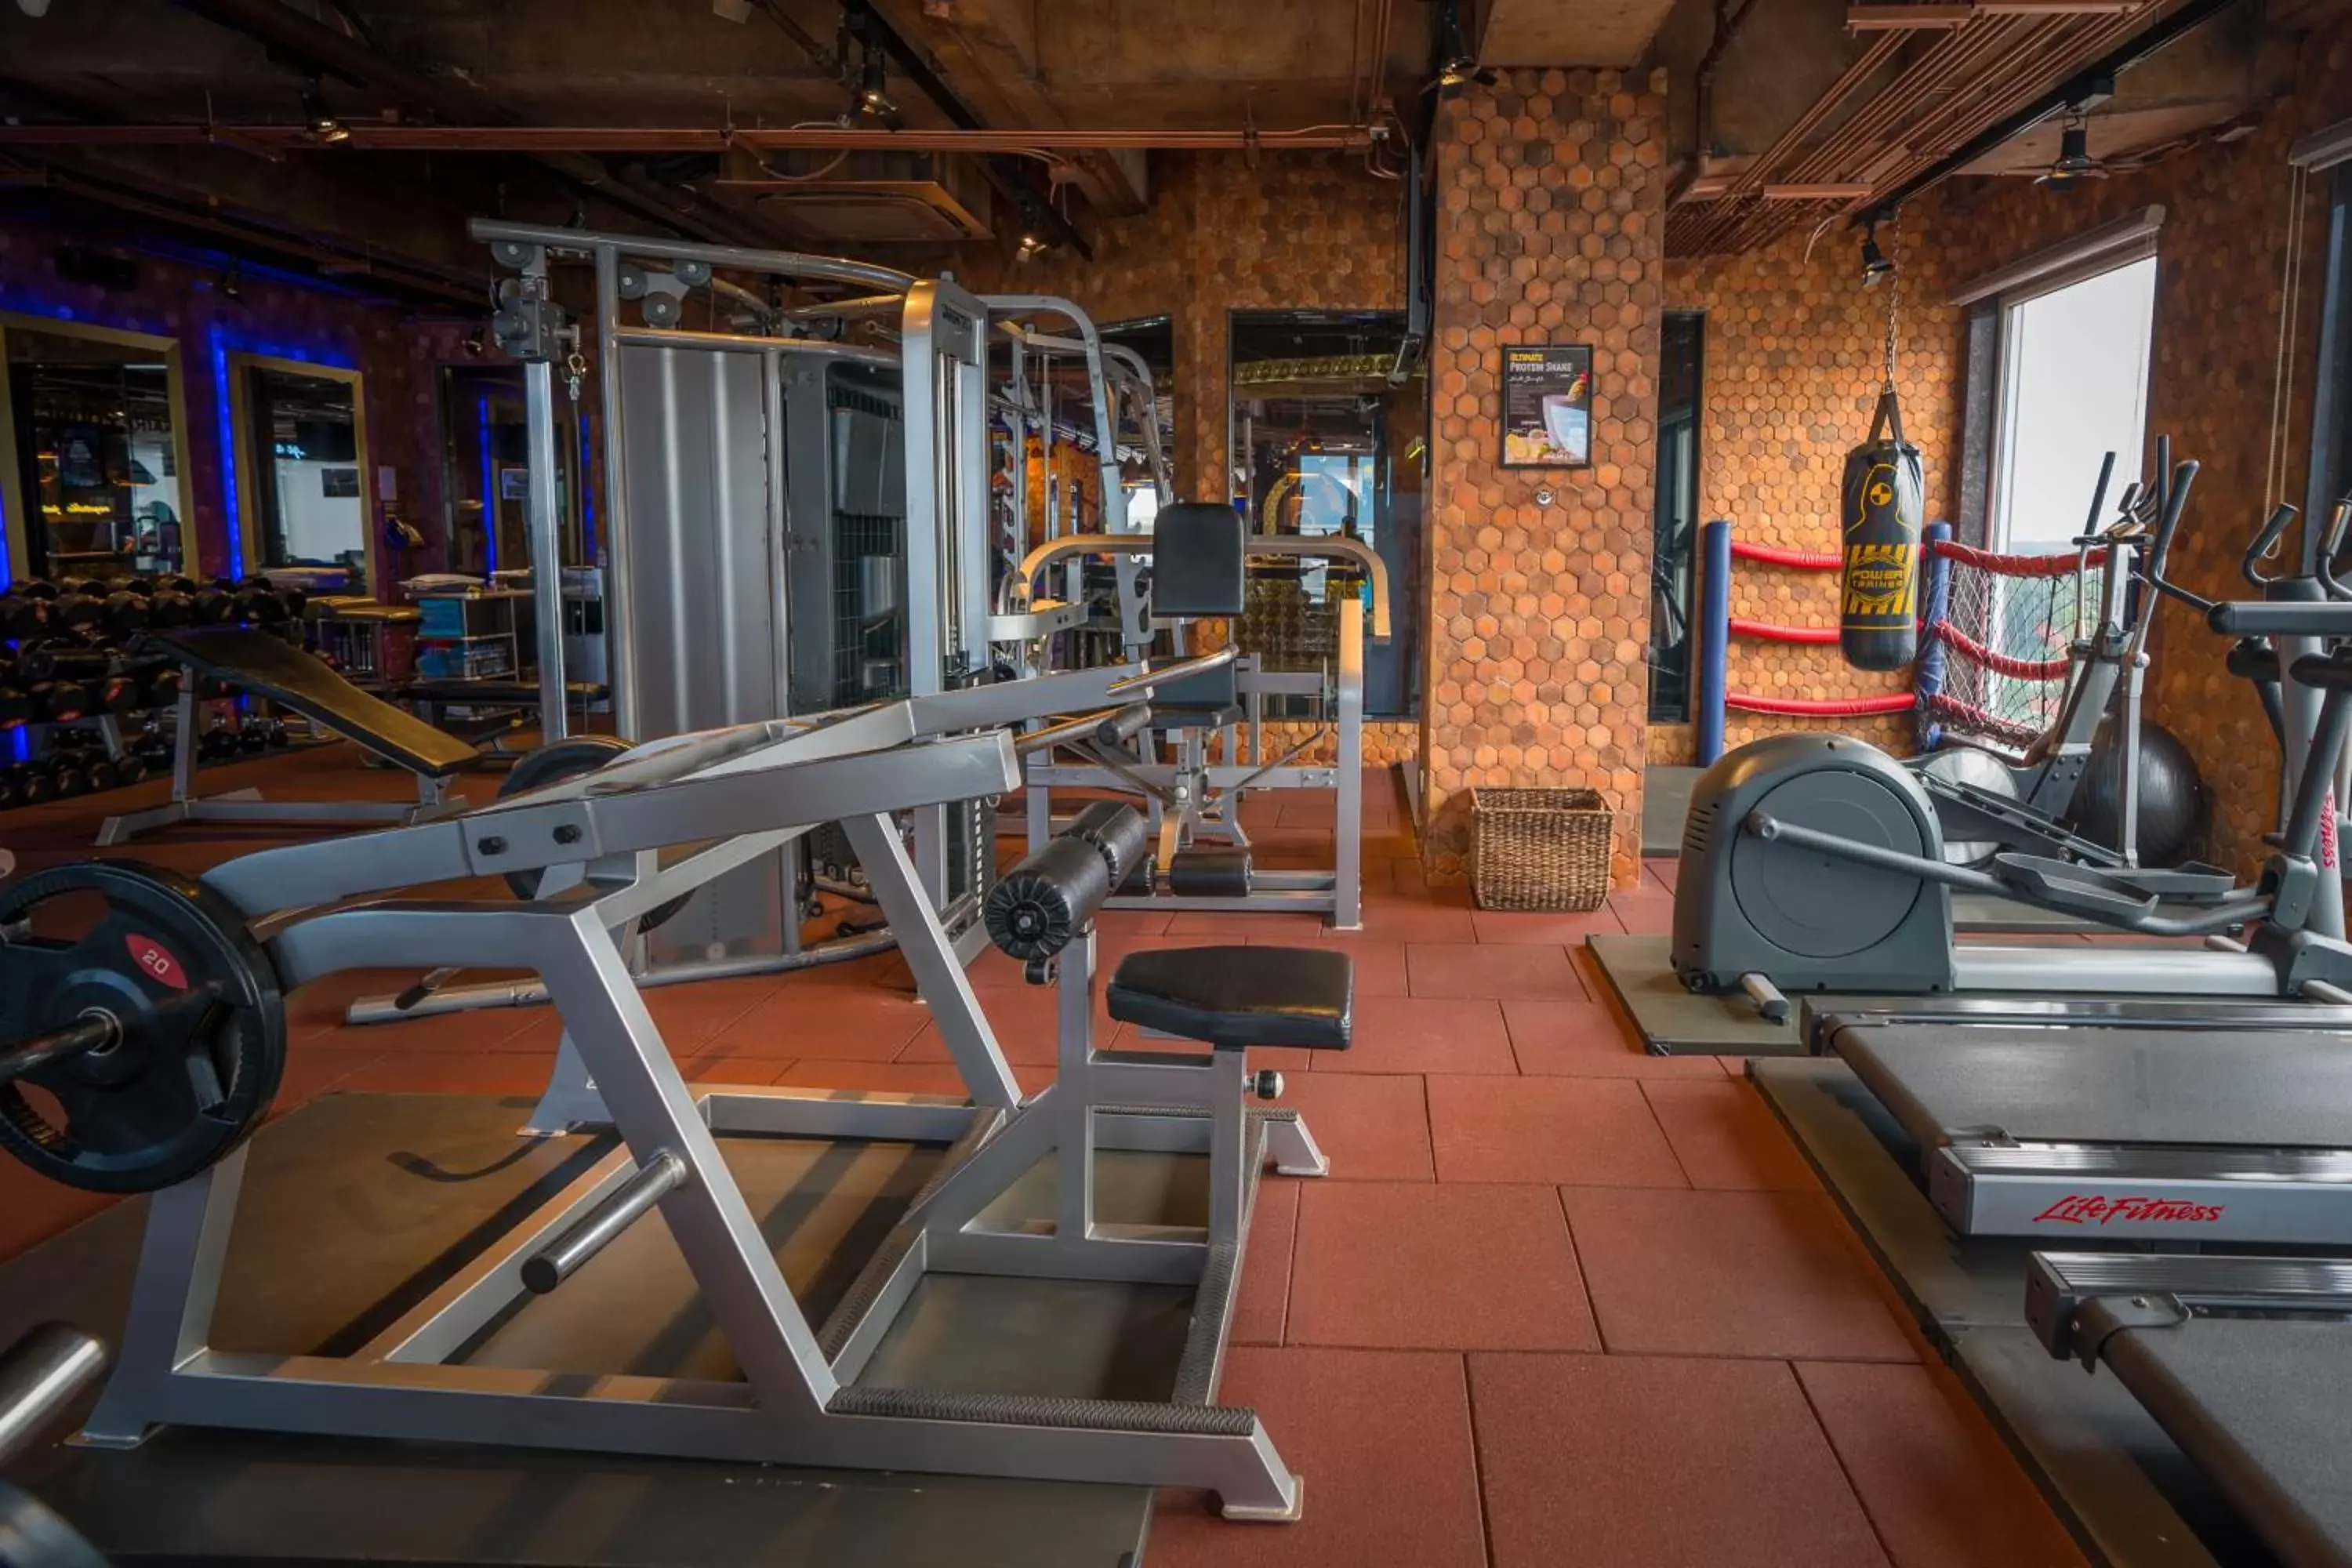 Fitness centre/facilities, Fitness Center/Facilities in ABC Hotel